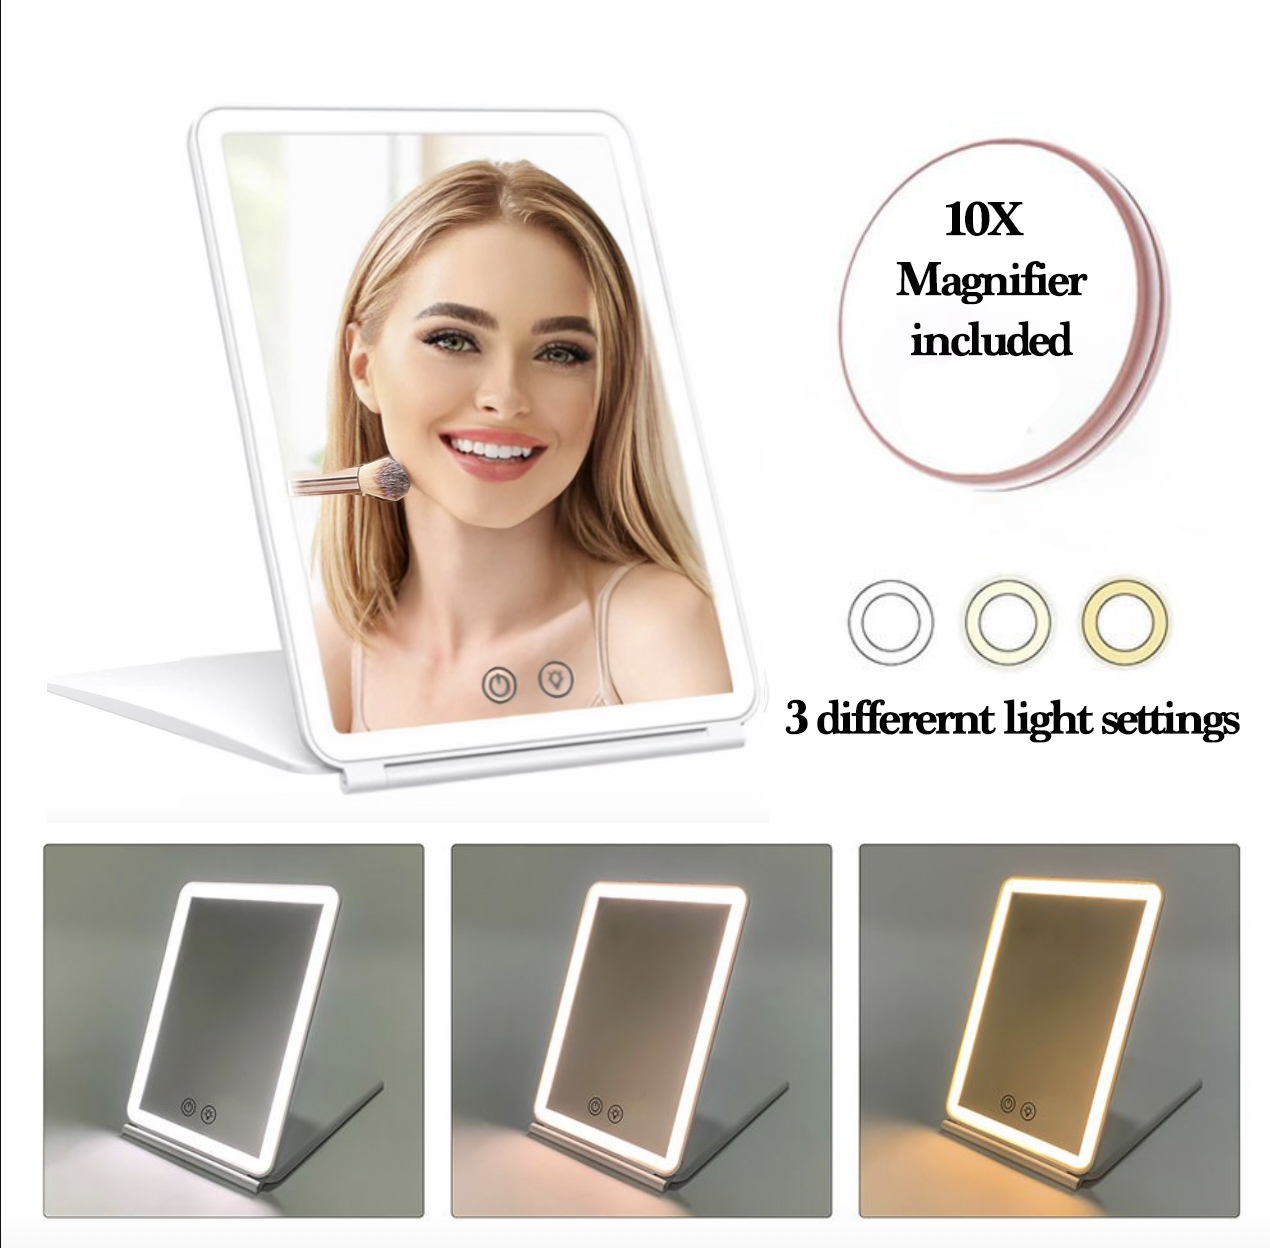 COMPACT TRAVEL MIRROR w/ LED LIGHT & MAGNIFIER Header Image